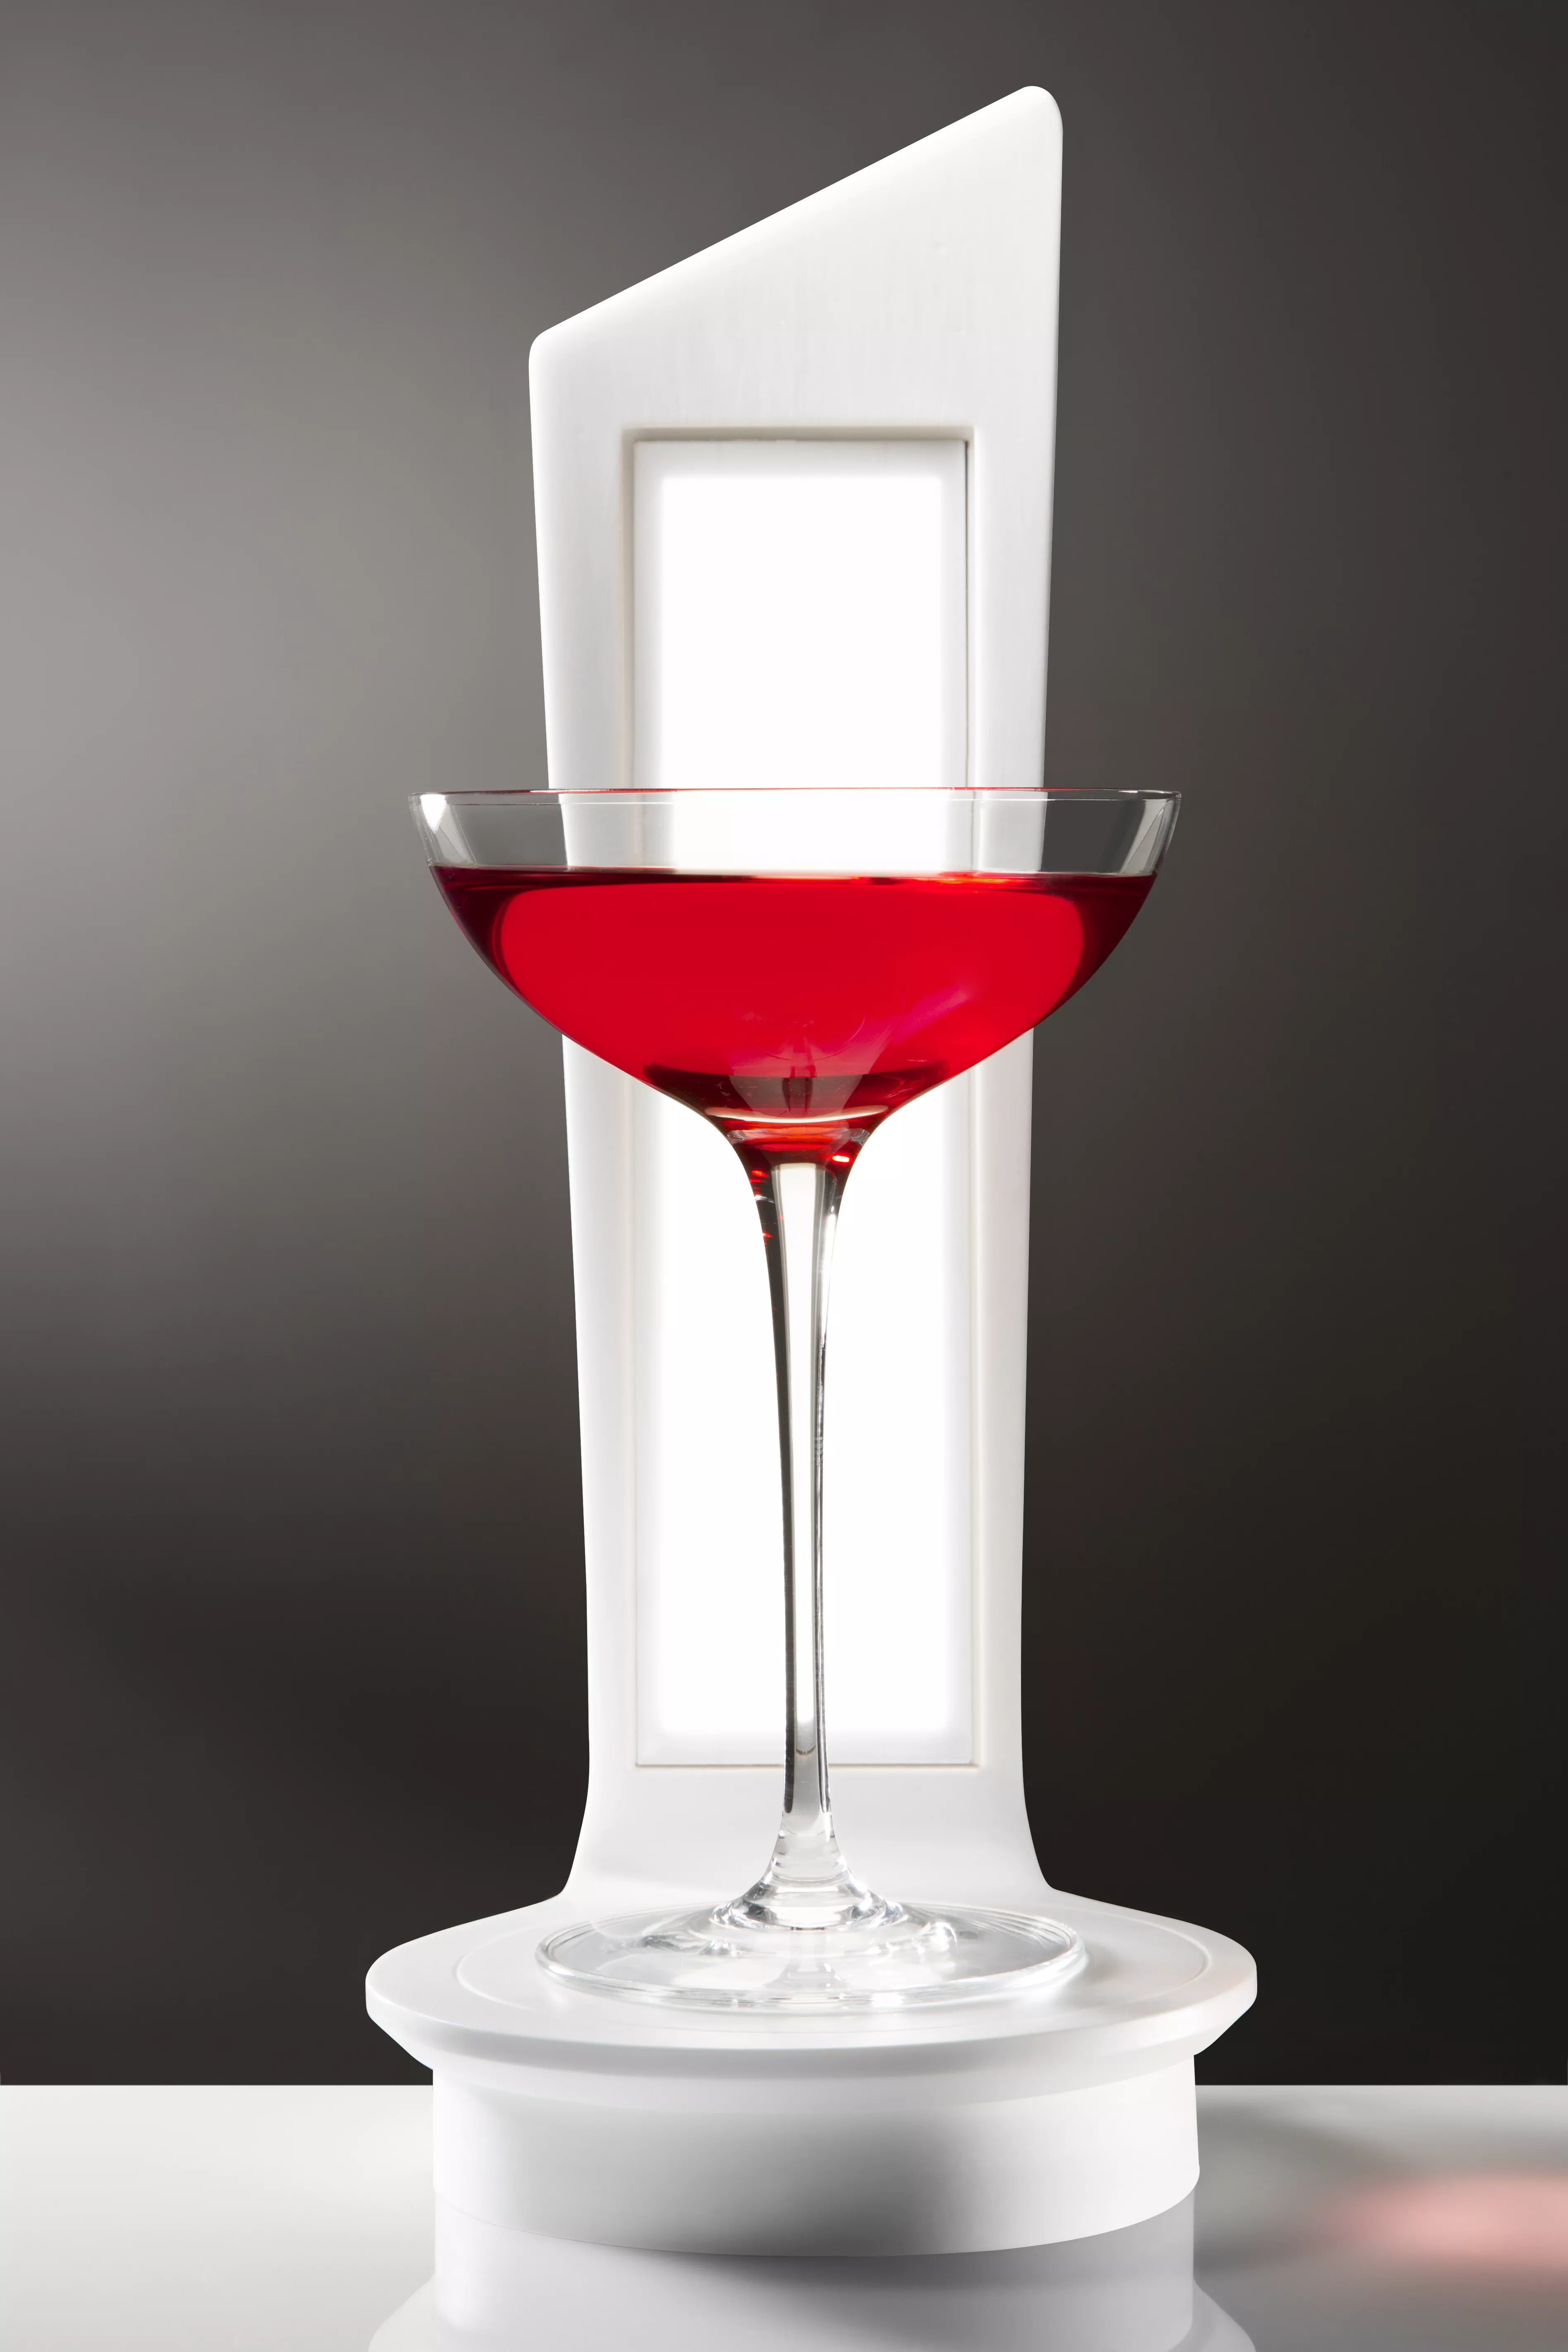 WineOLED: innovative wireless lamp in HIMACS for wine lovers